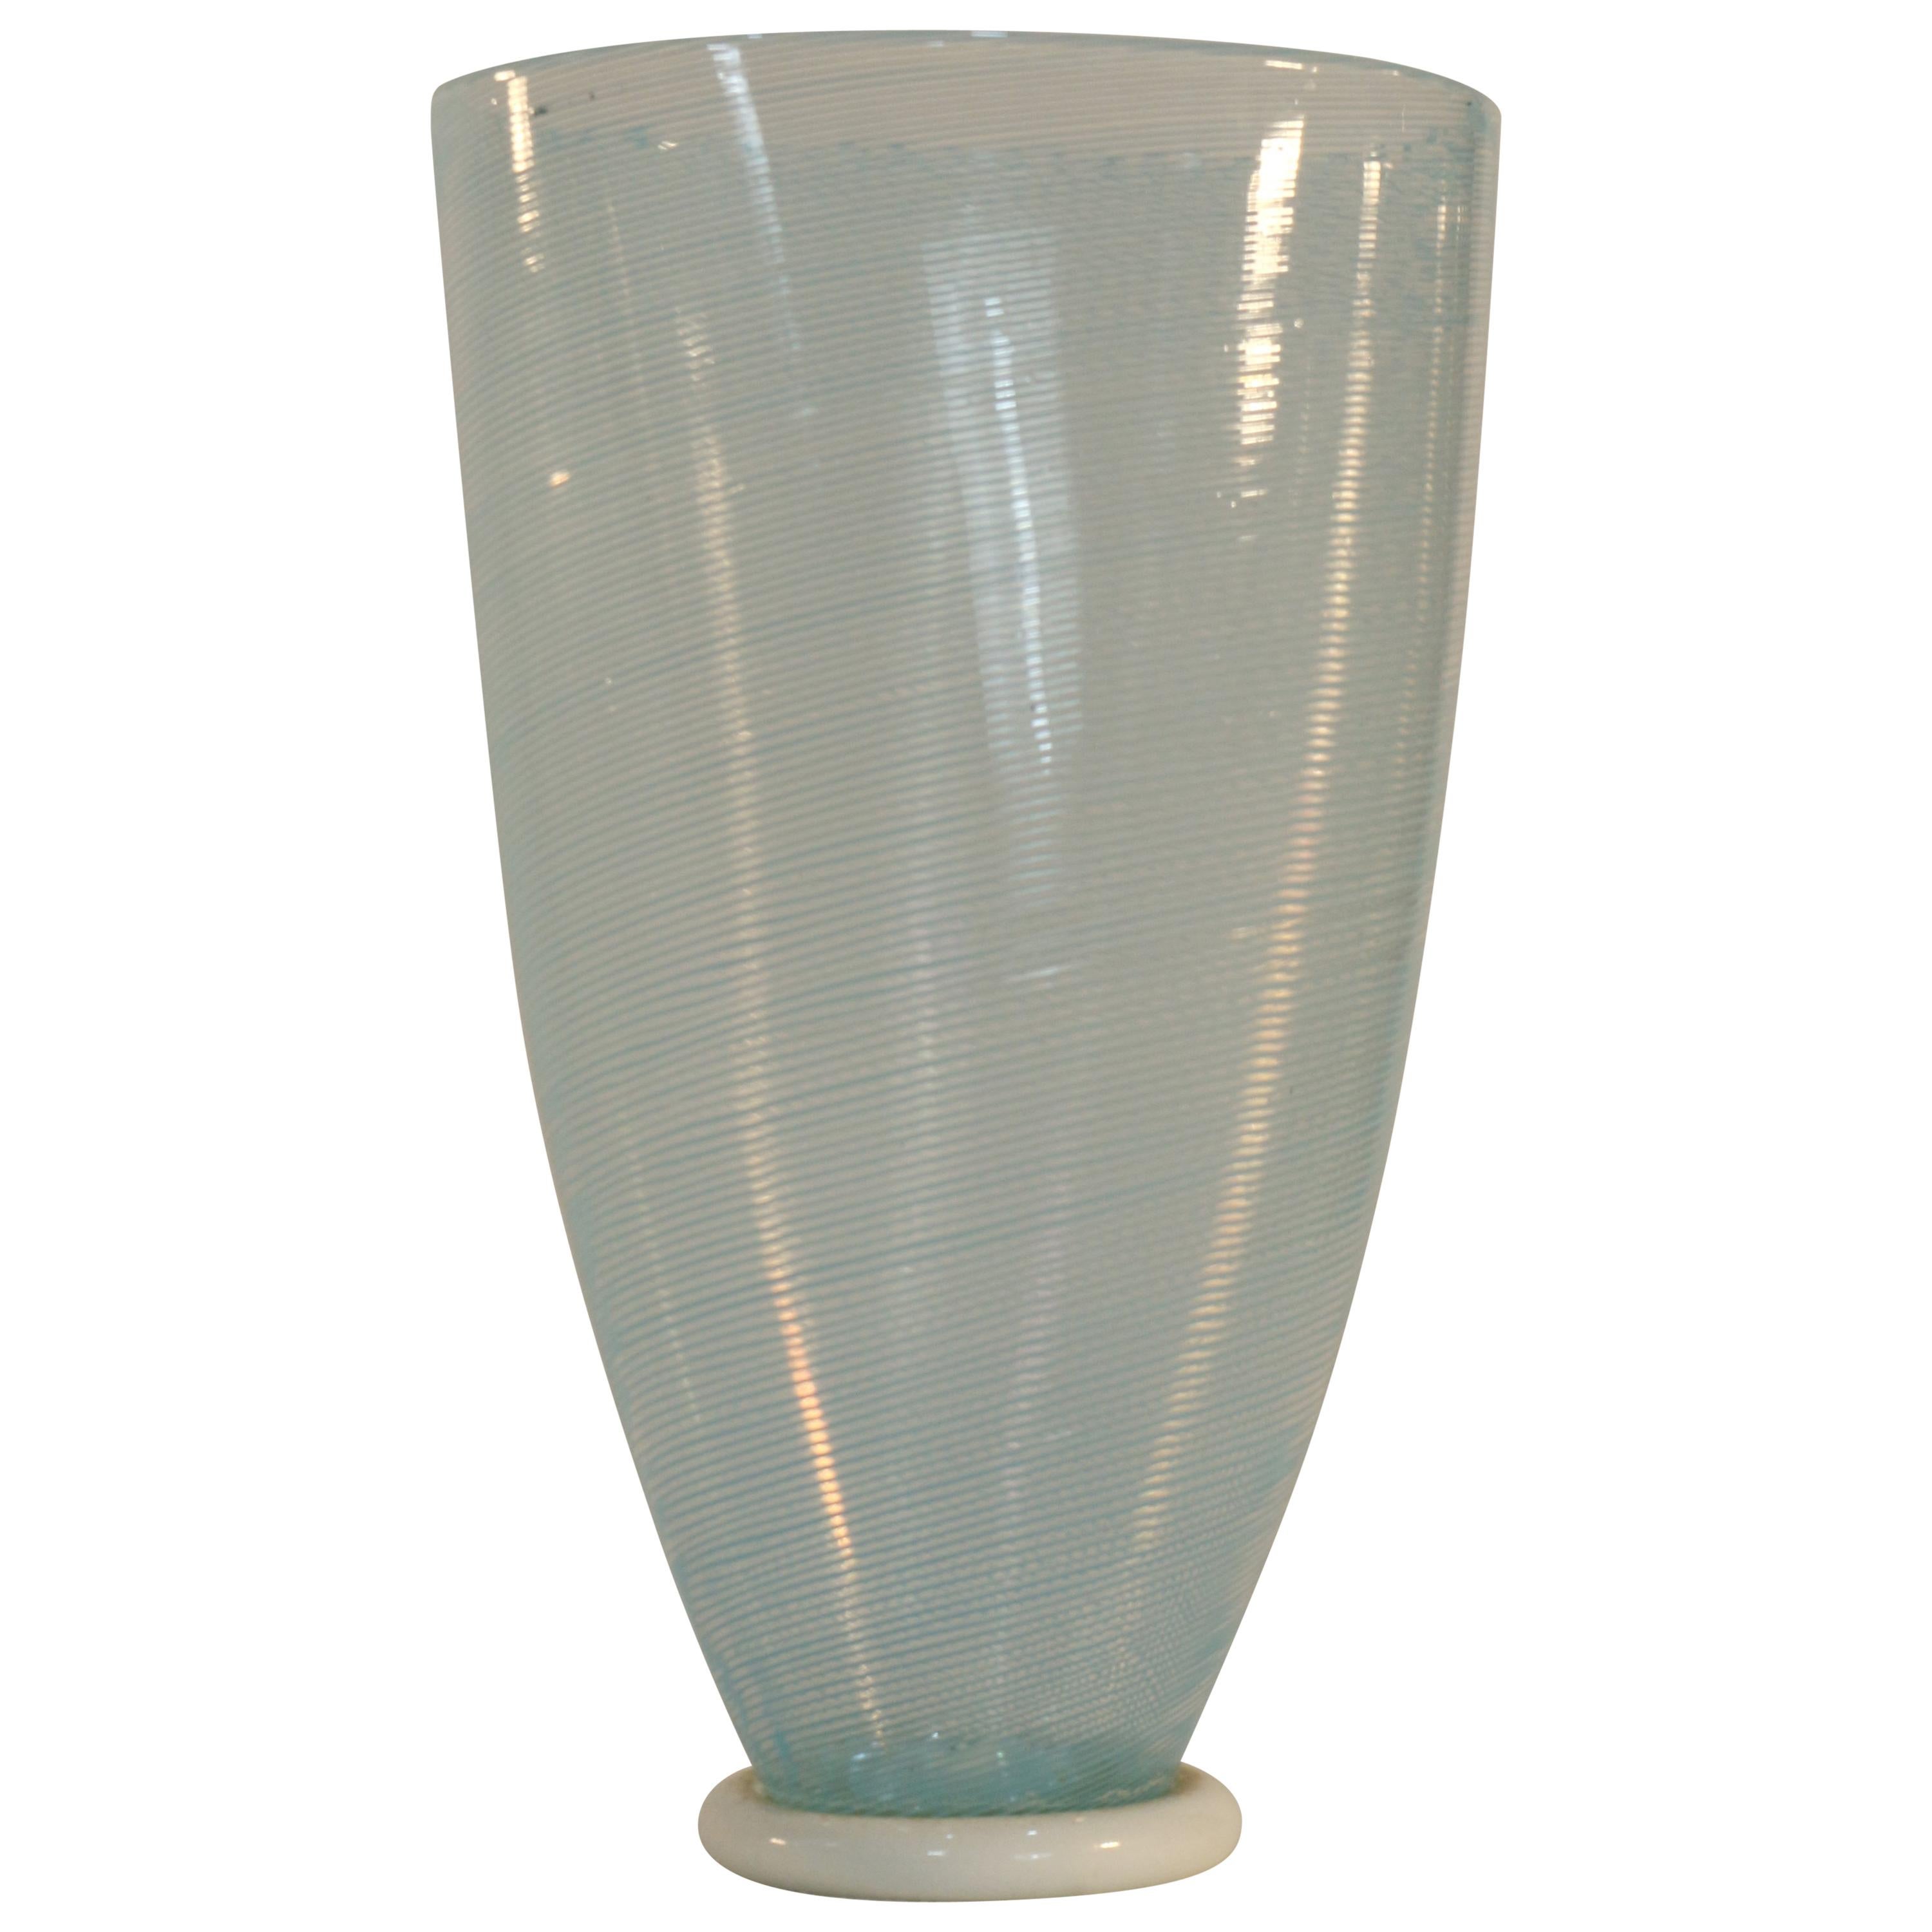 Dino Martens Vase for Aureliano Toso, Murano Glass, Light Blue and White, 1960s For Sale